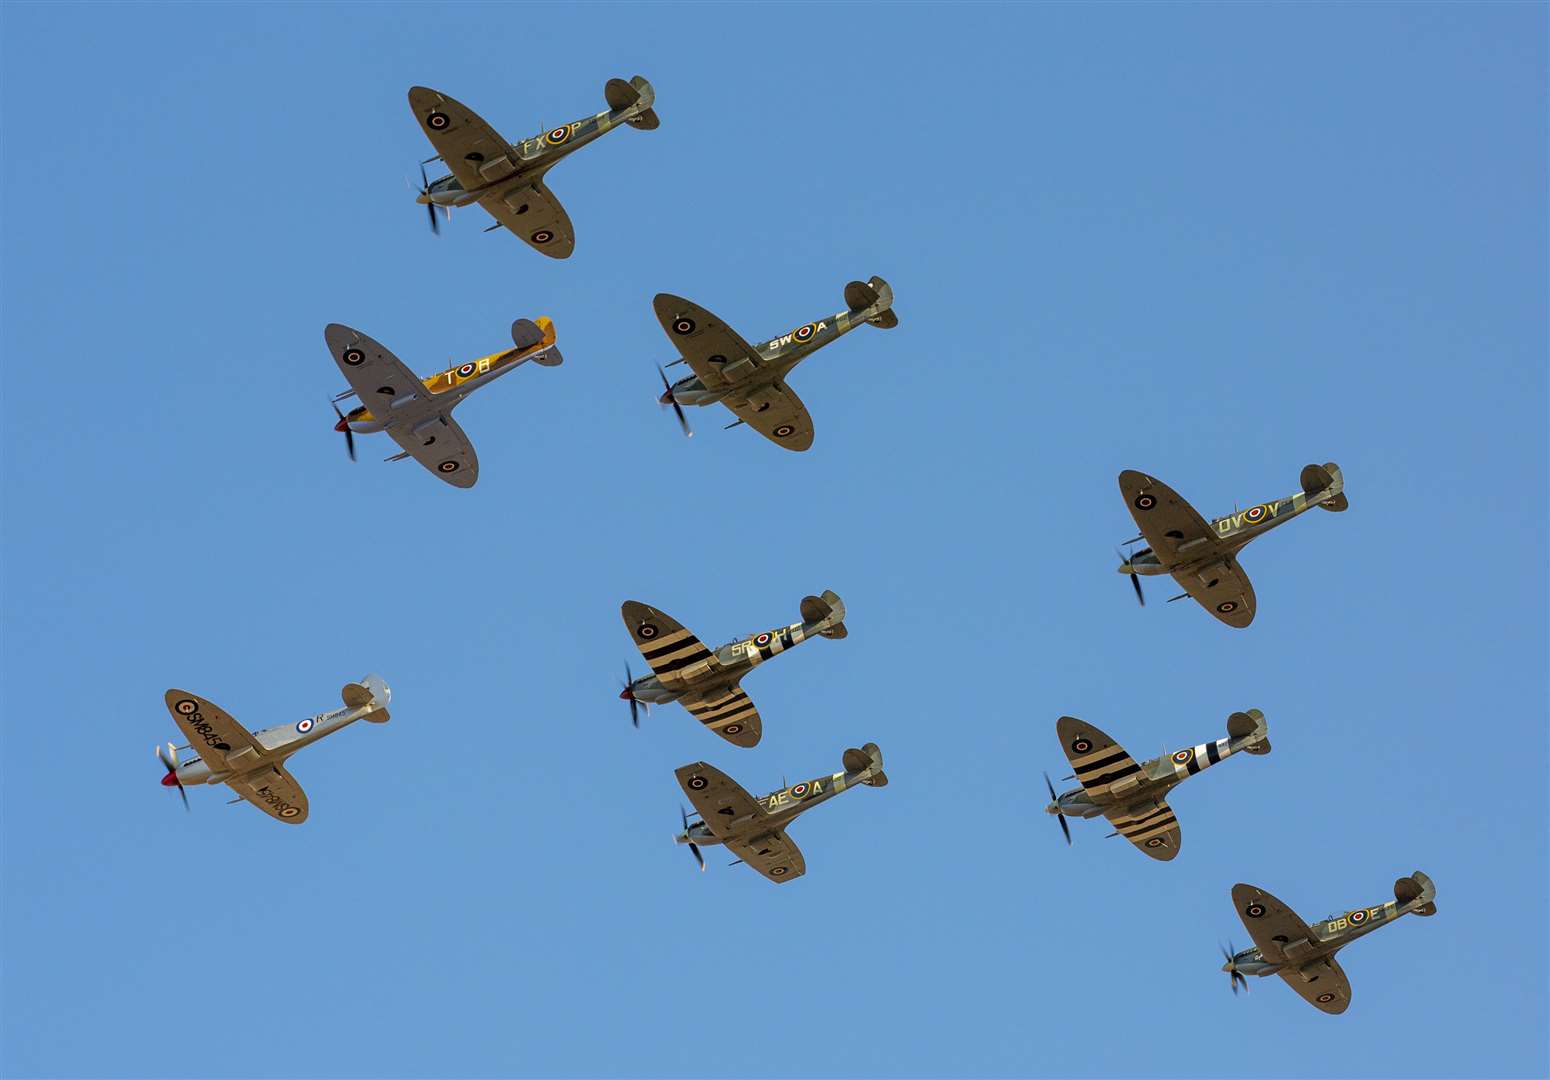 A Diamond Nine of Spitfires at Duxford Battle of Britain Airshow in 2019